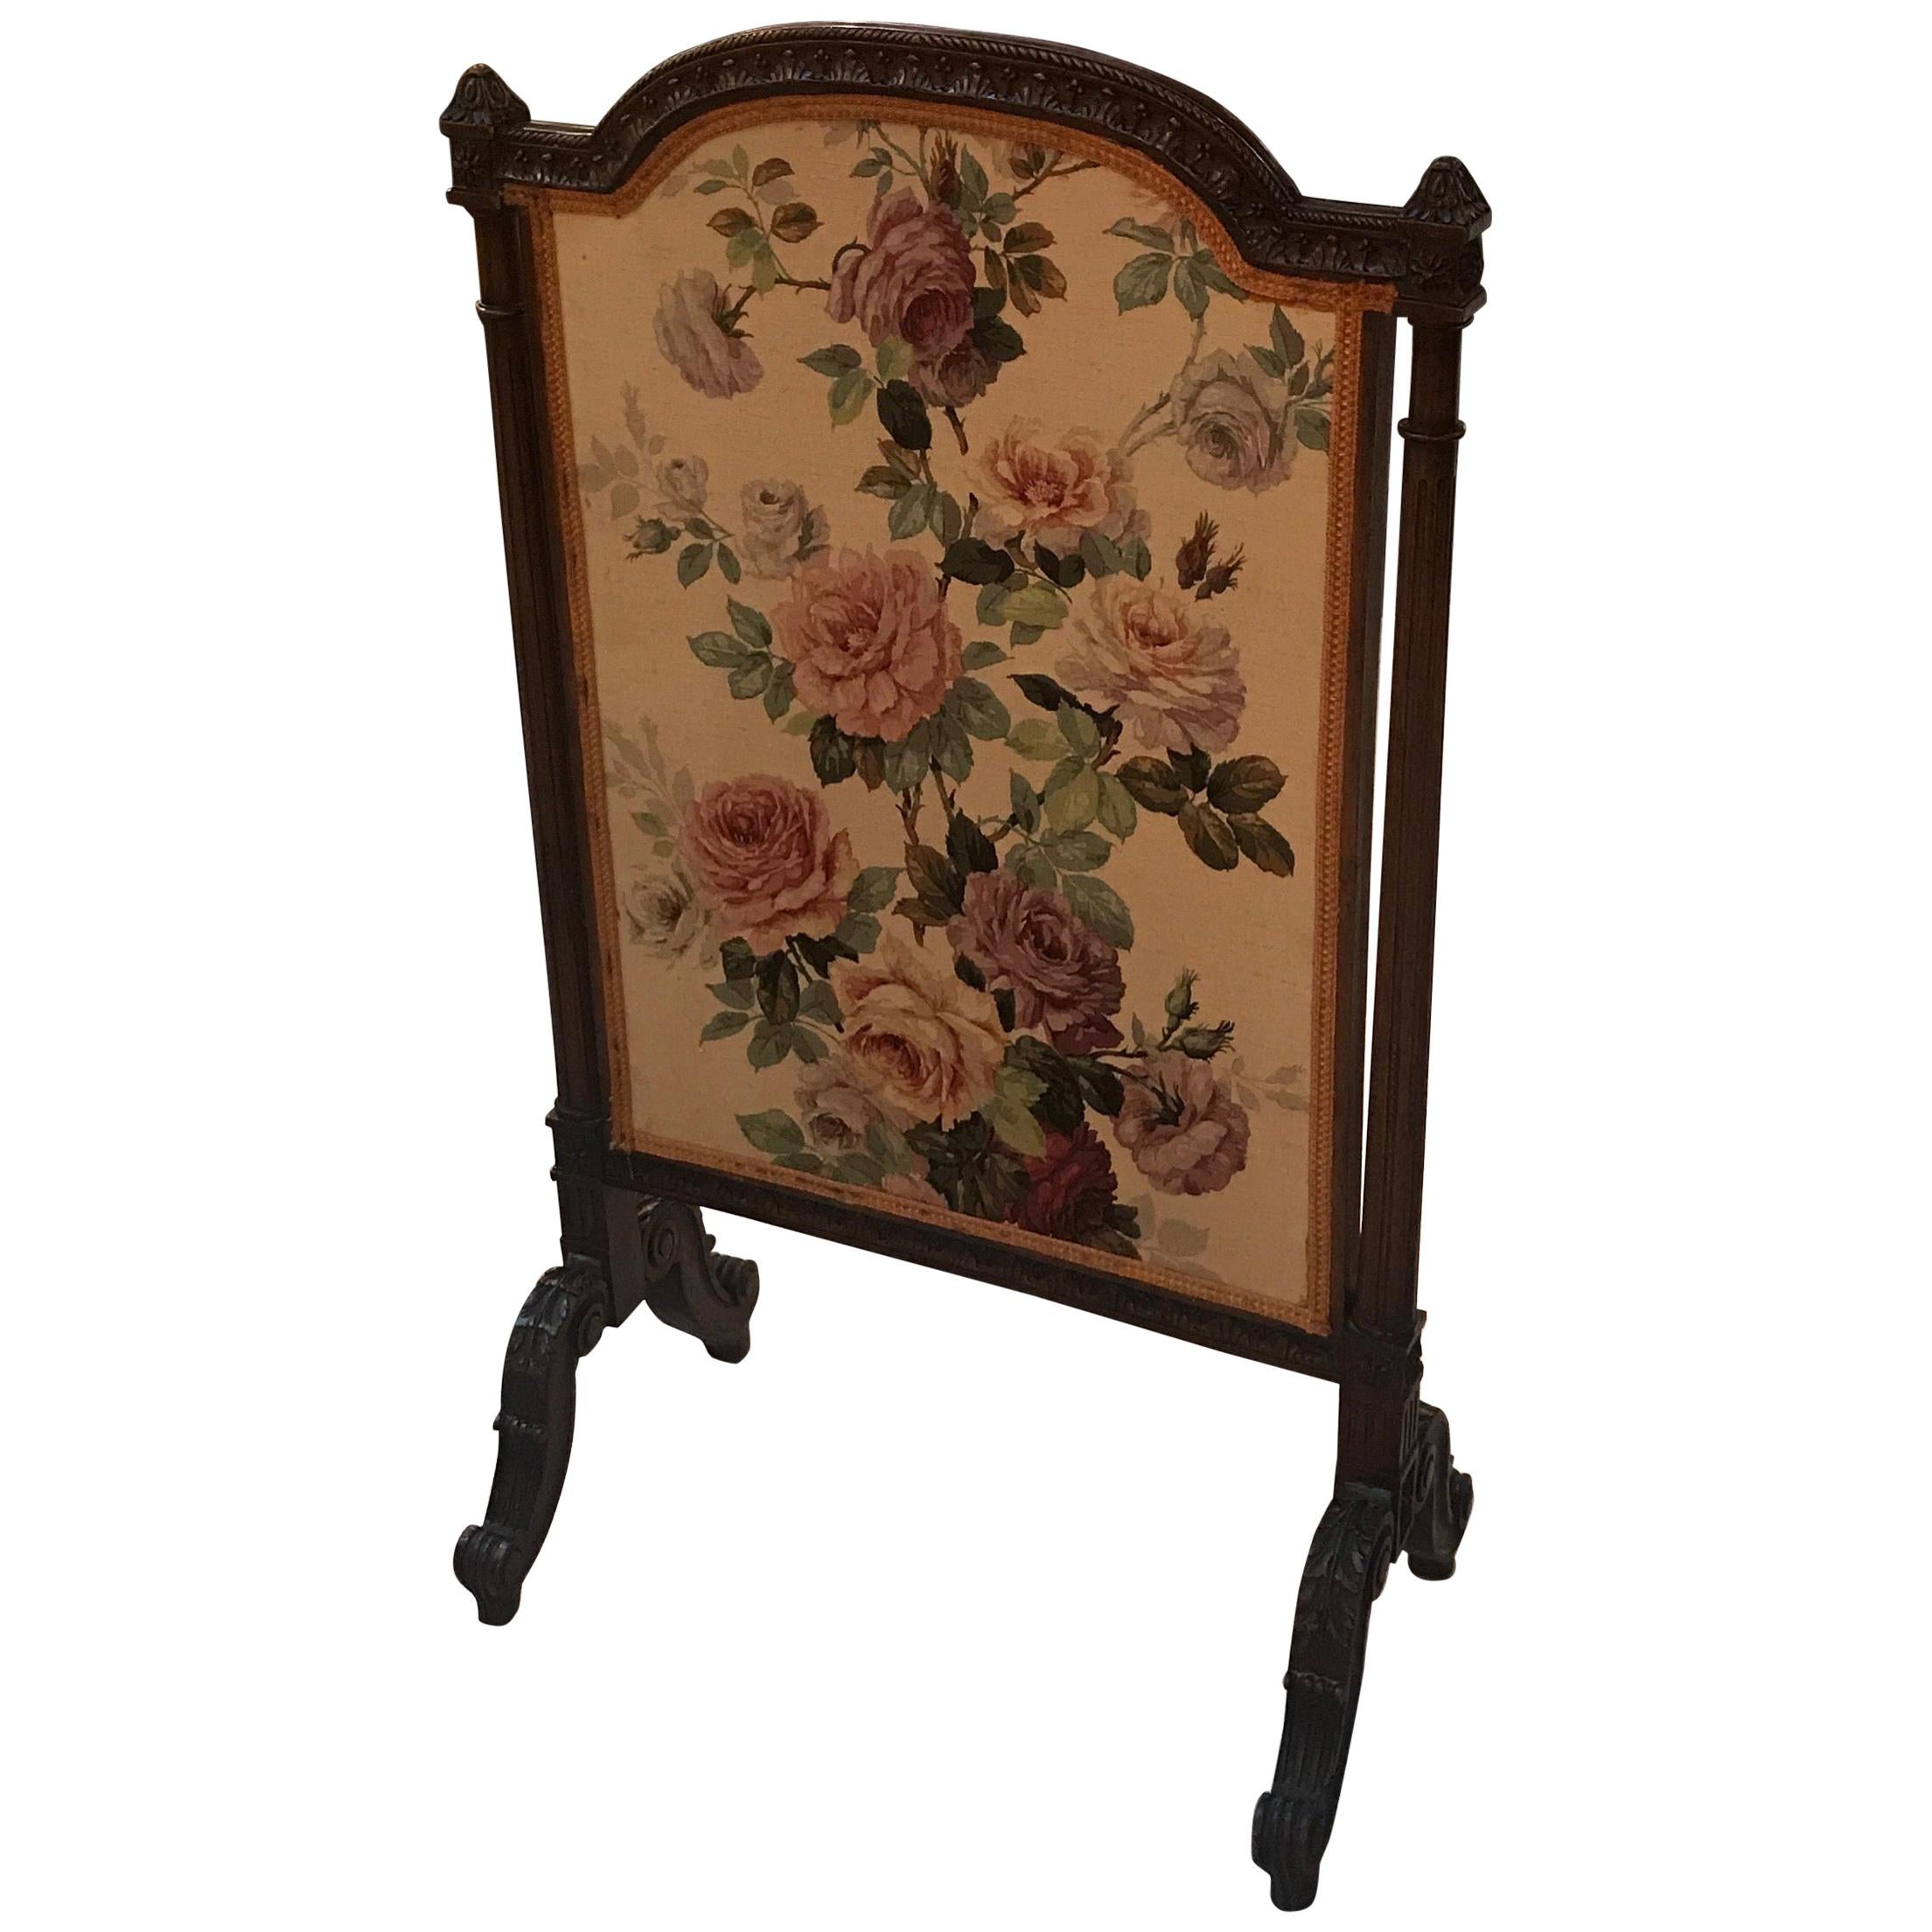 19th Century Carved Mahogany and Floral Linen Fire Screen